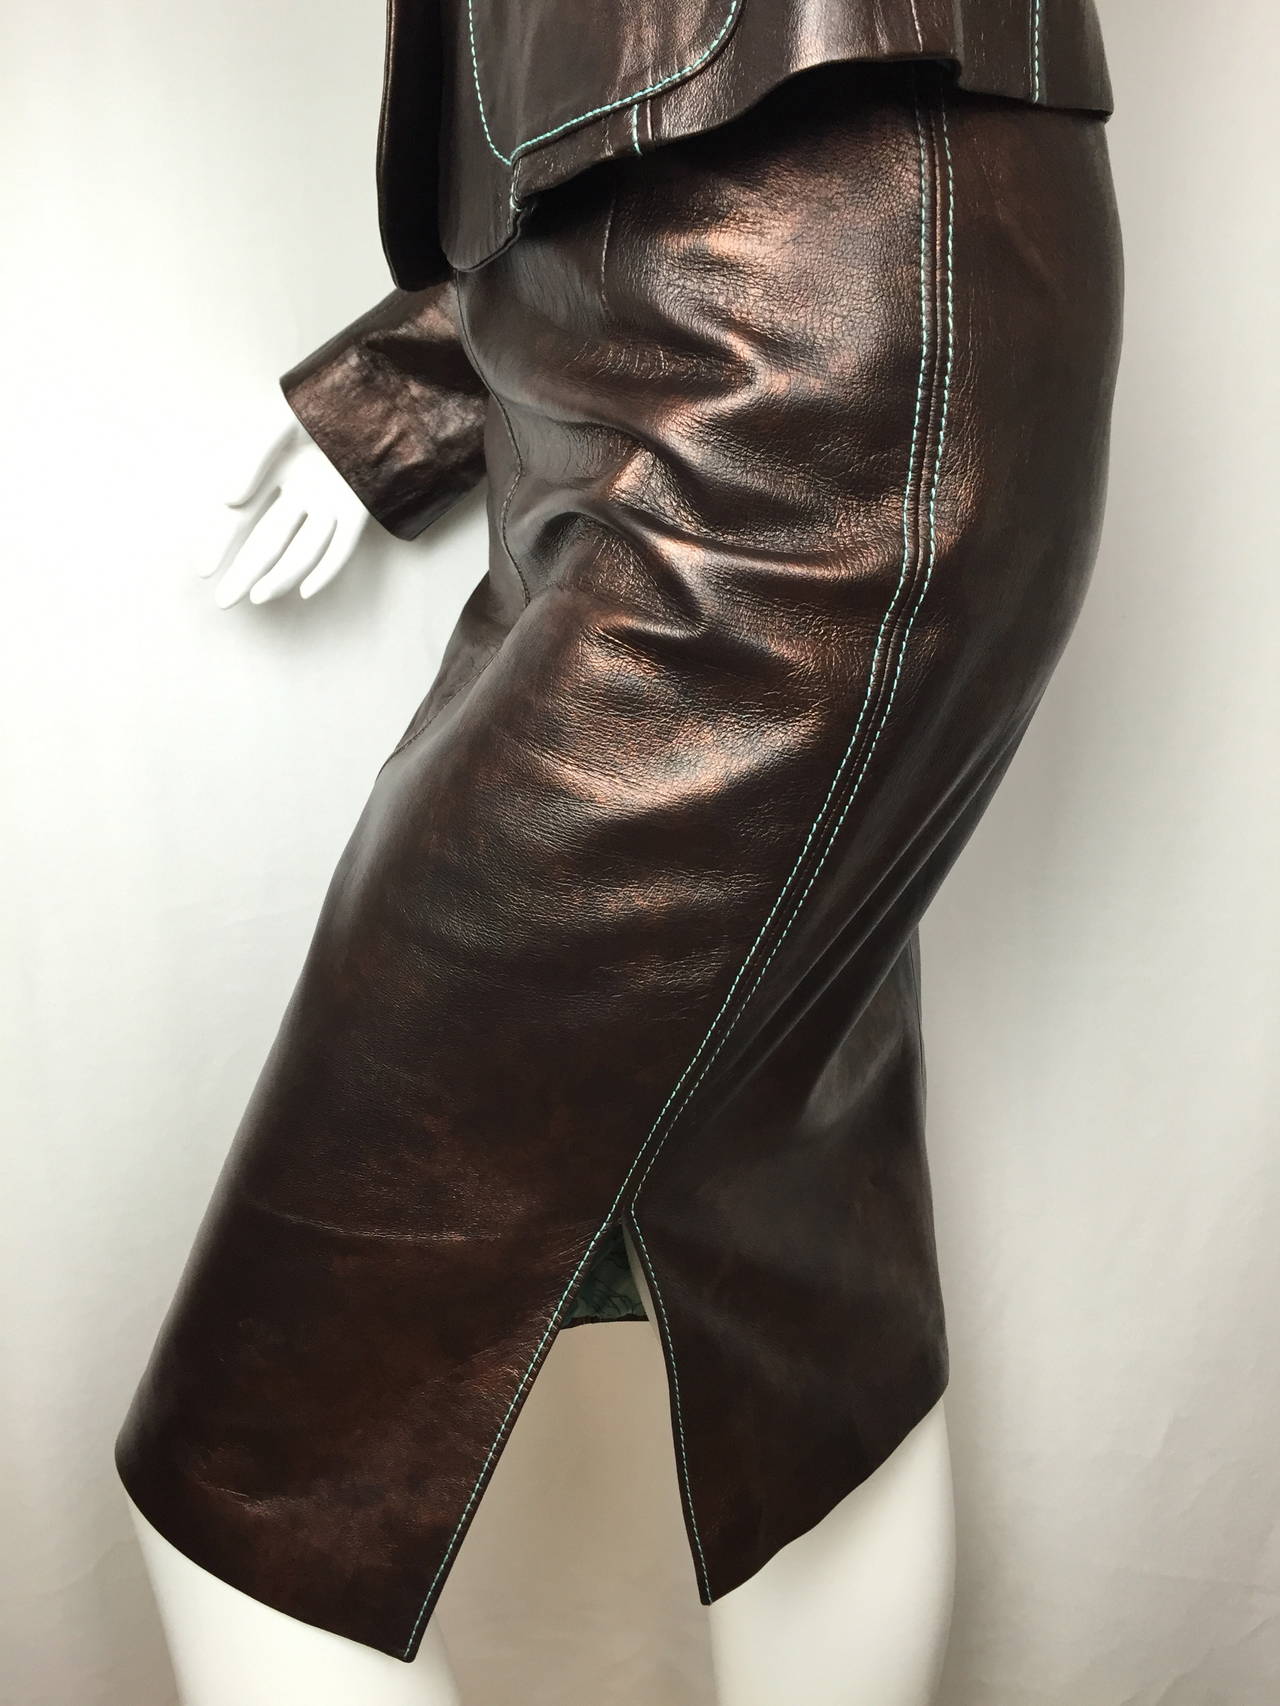 Sleek brown leather skirt suit by Christian Lacroix.  Sharp styling.  Made of butter soft brown leather with a coppery iridescent finish that is perfect for day into evening wear.  

70's style aqua top stitching on the jacket and skirt is echoed